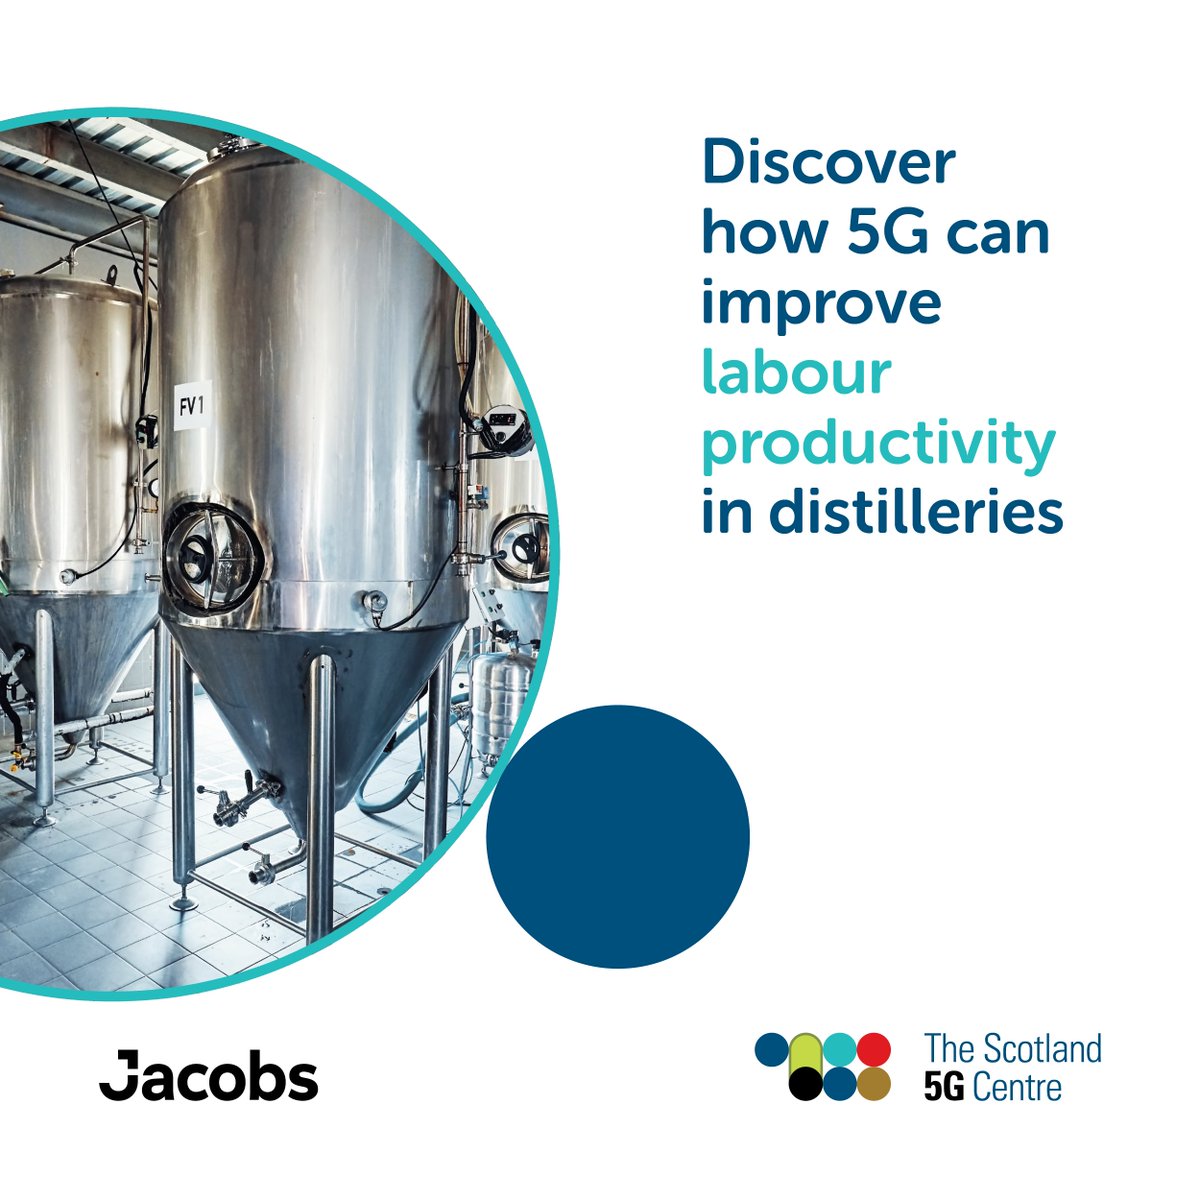 Interested in learning about 5G in distilleries? 5G enables real-time data collection, allowing warehouse operators to monitor each cask's location and movement accurately. Download the report: ow.ly/T2TE50PY7rP